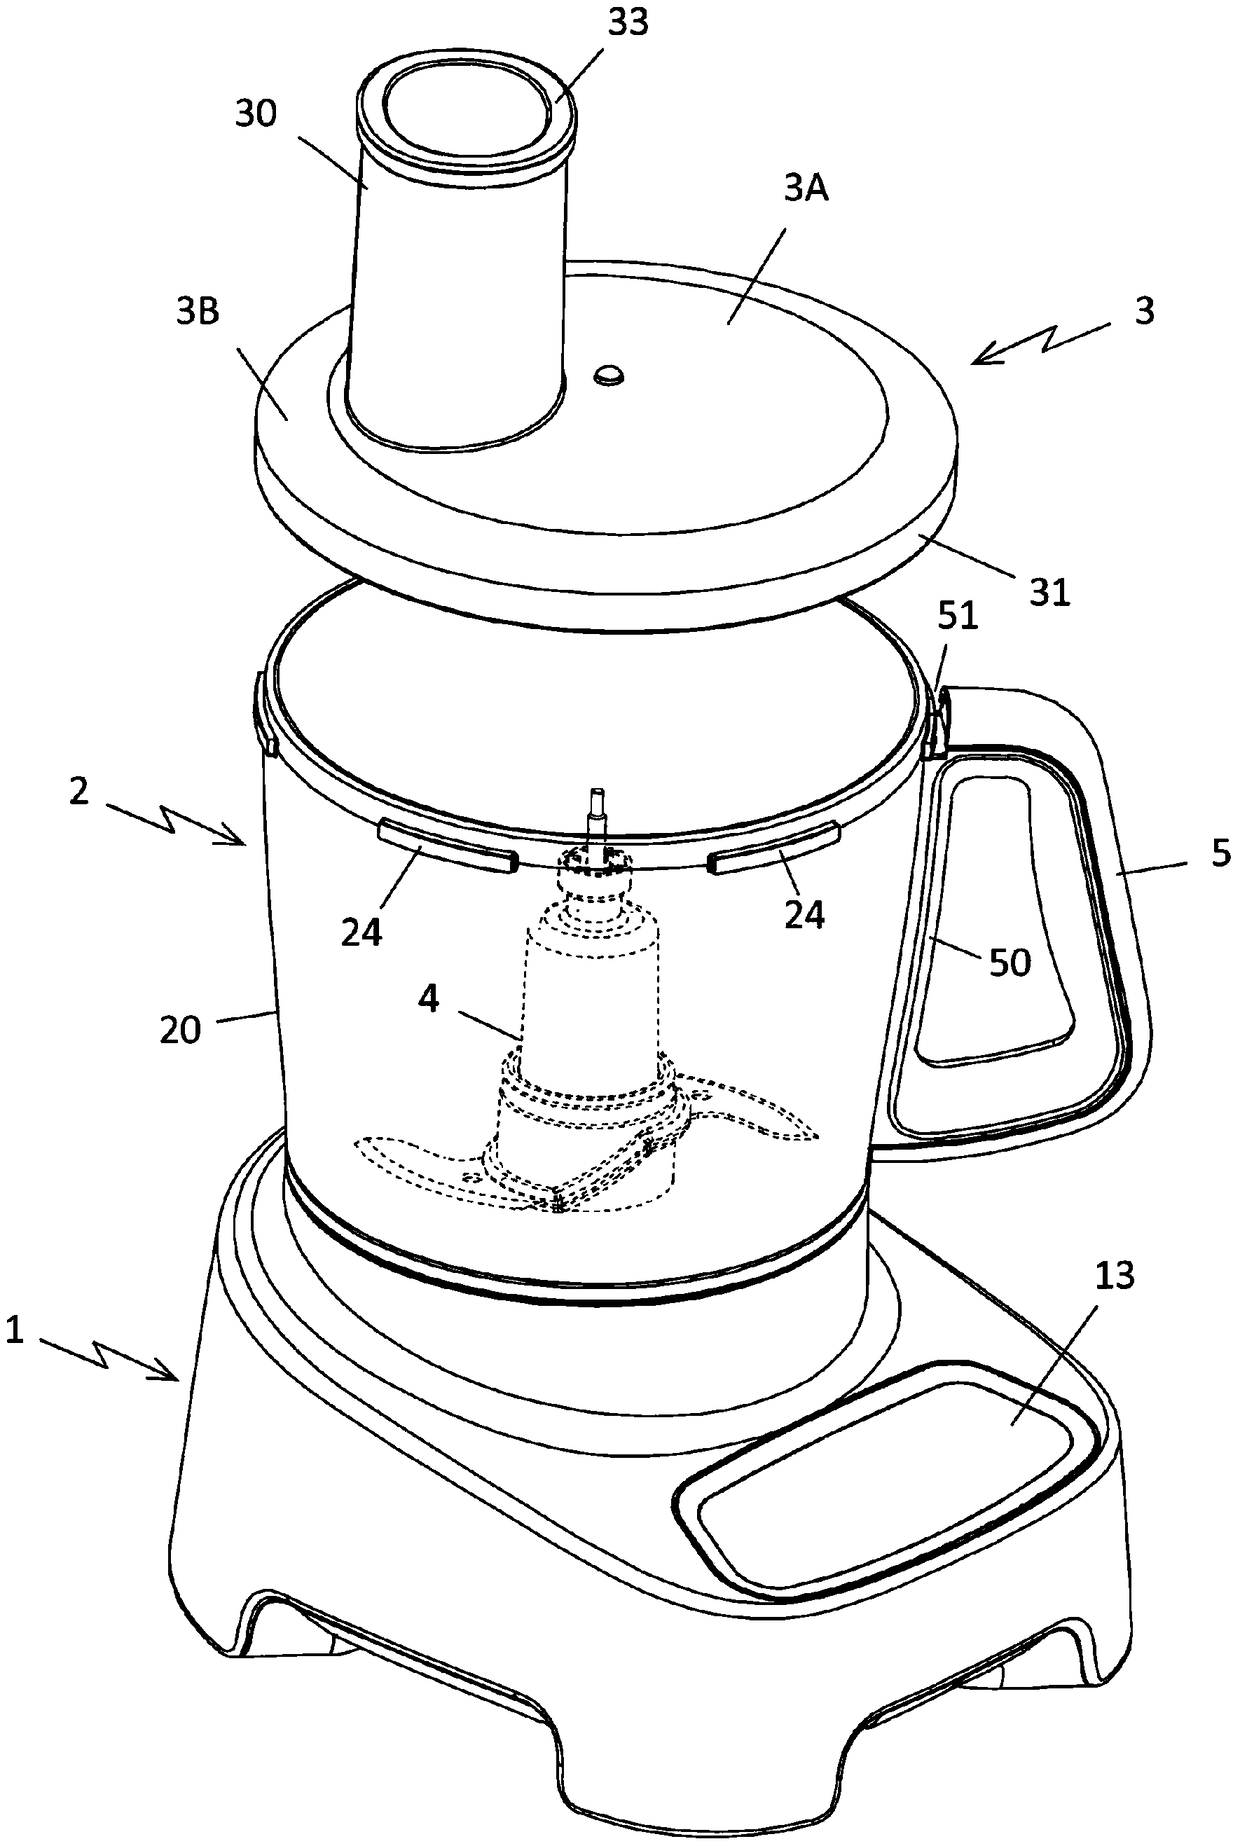 Cooking and preparation appliance comprising a container closed by a detachable lid cooperating with a safety device